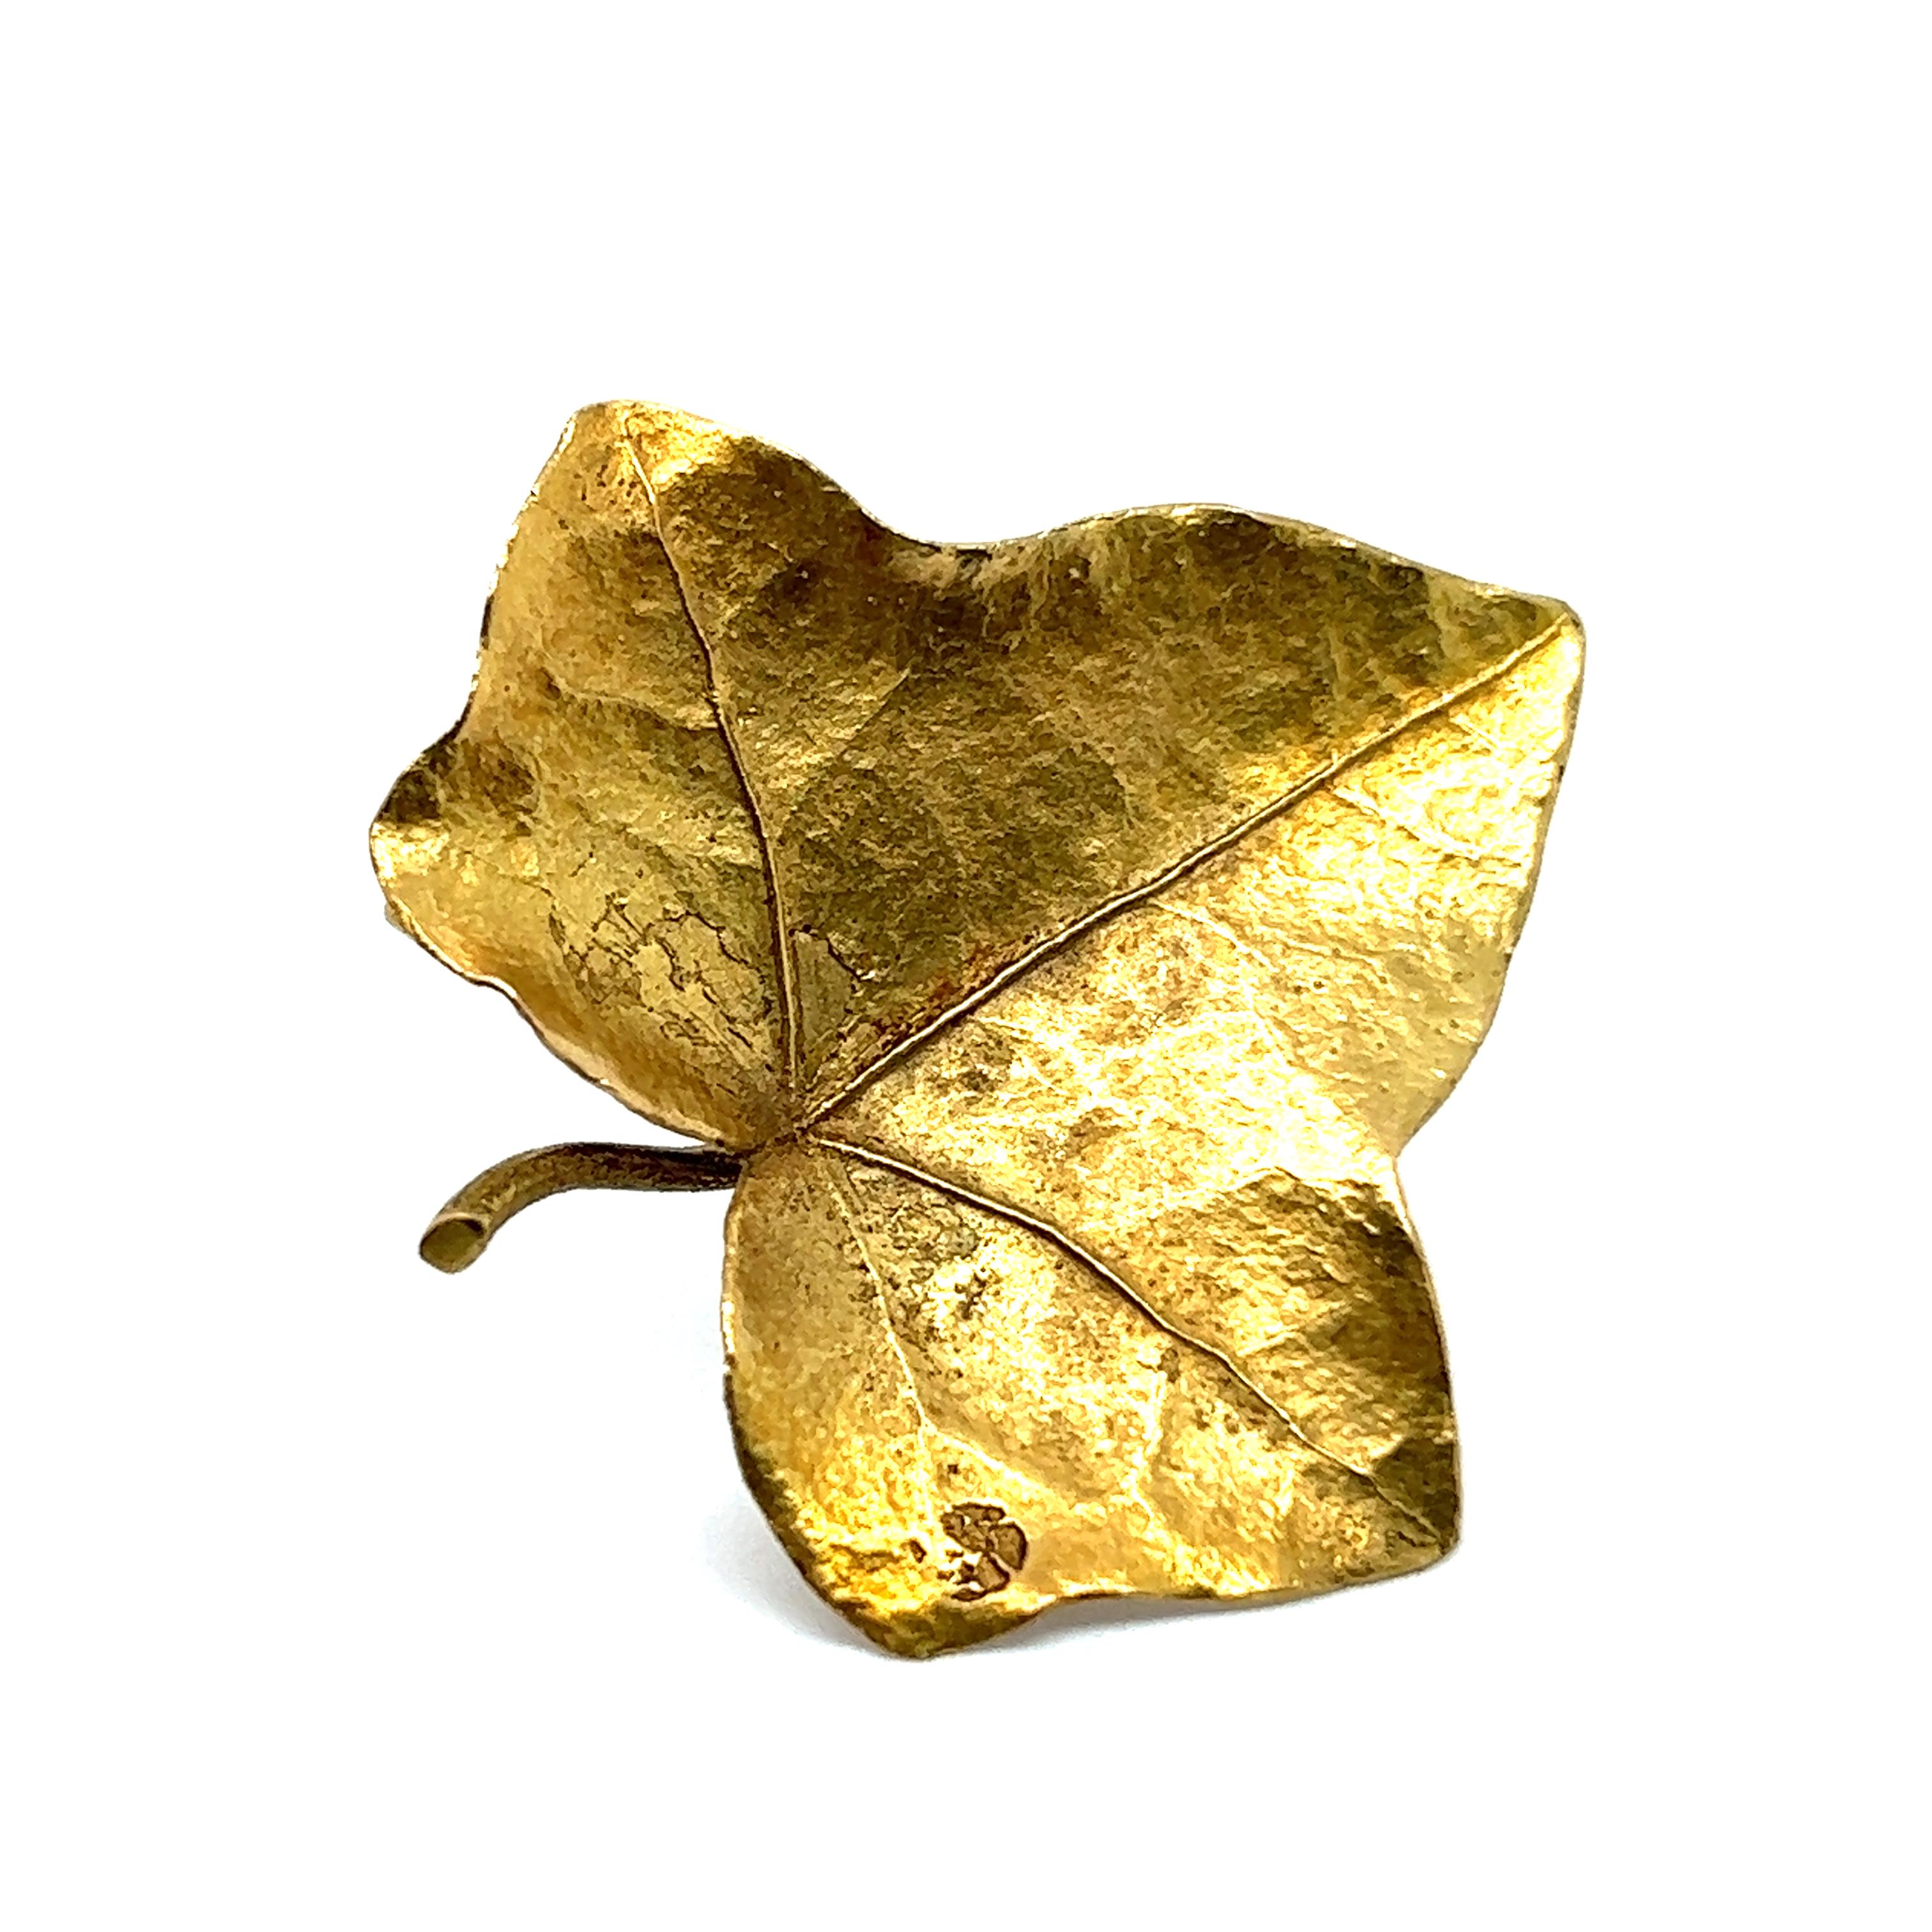 An exquisite leaf brooch from Bucherer crafted in 18 Karat yellow gold. Founded in 1888, Bucherer blends tradition with innovation, creating enduring pieces that reflect the brand's unwavering dedication to excellence.

This sophisticated bijoux